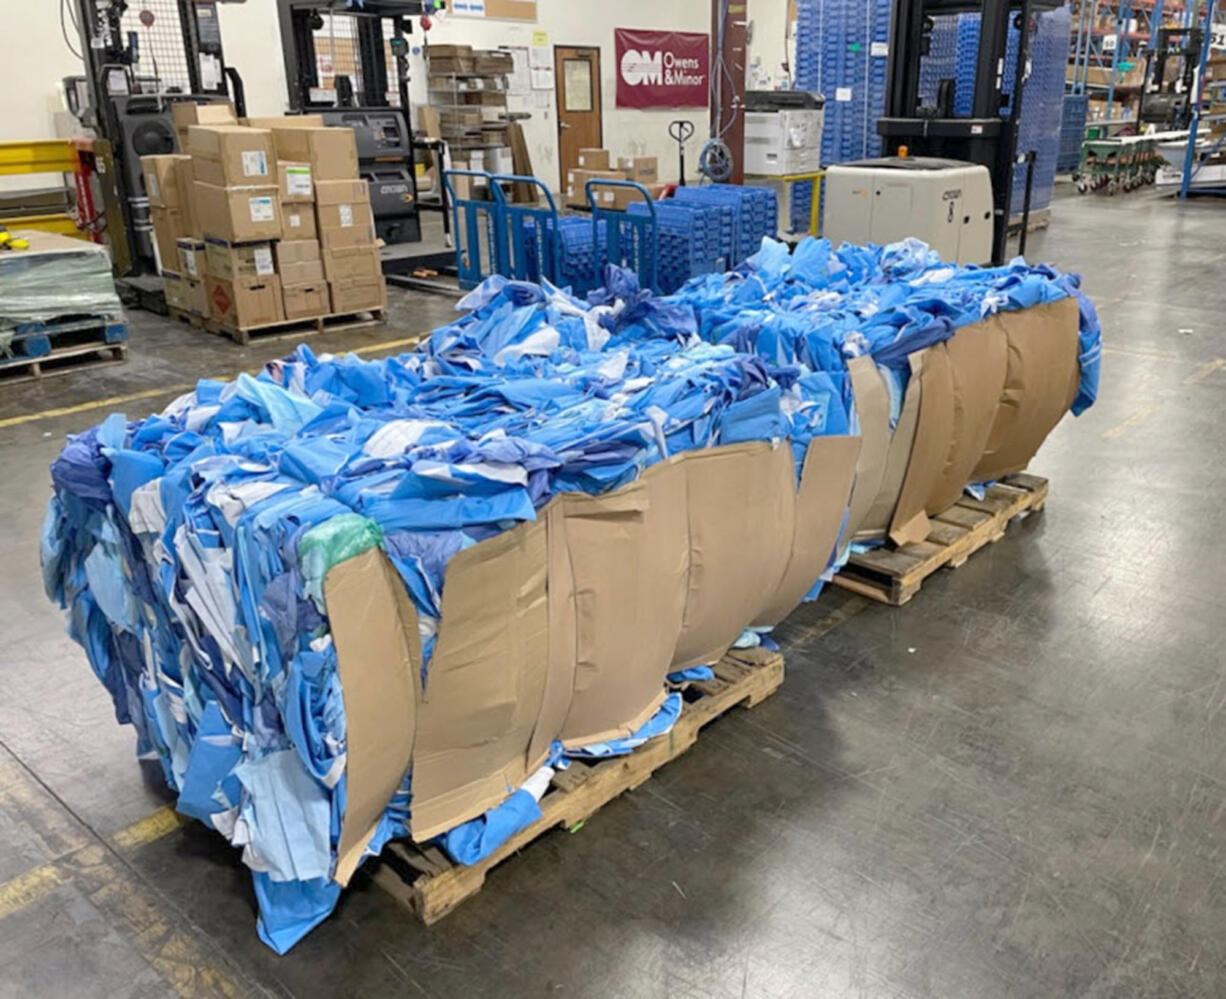 One thousand pounds of baled surgical blue wrap is prepared to be recycled. The material can be reused as hospital gowns, plastic washbasins and more.